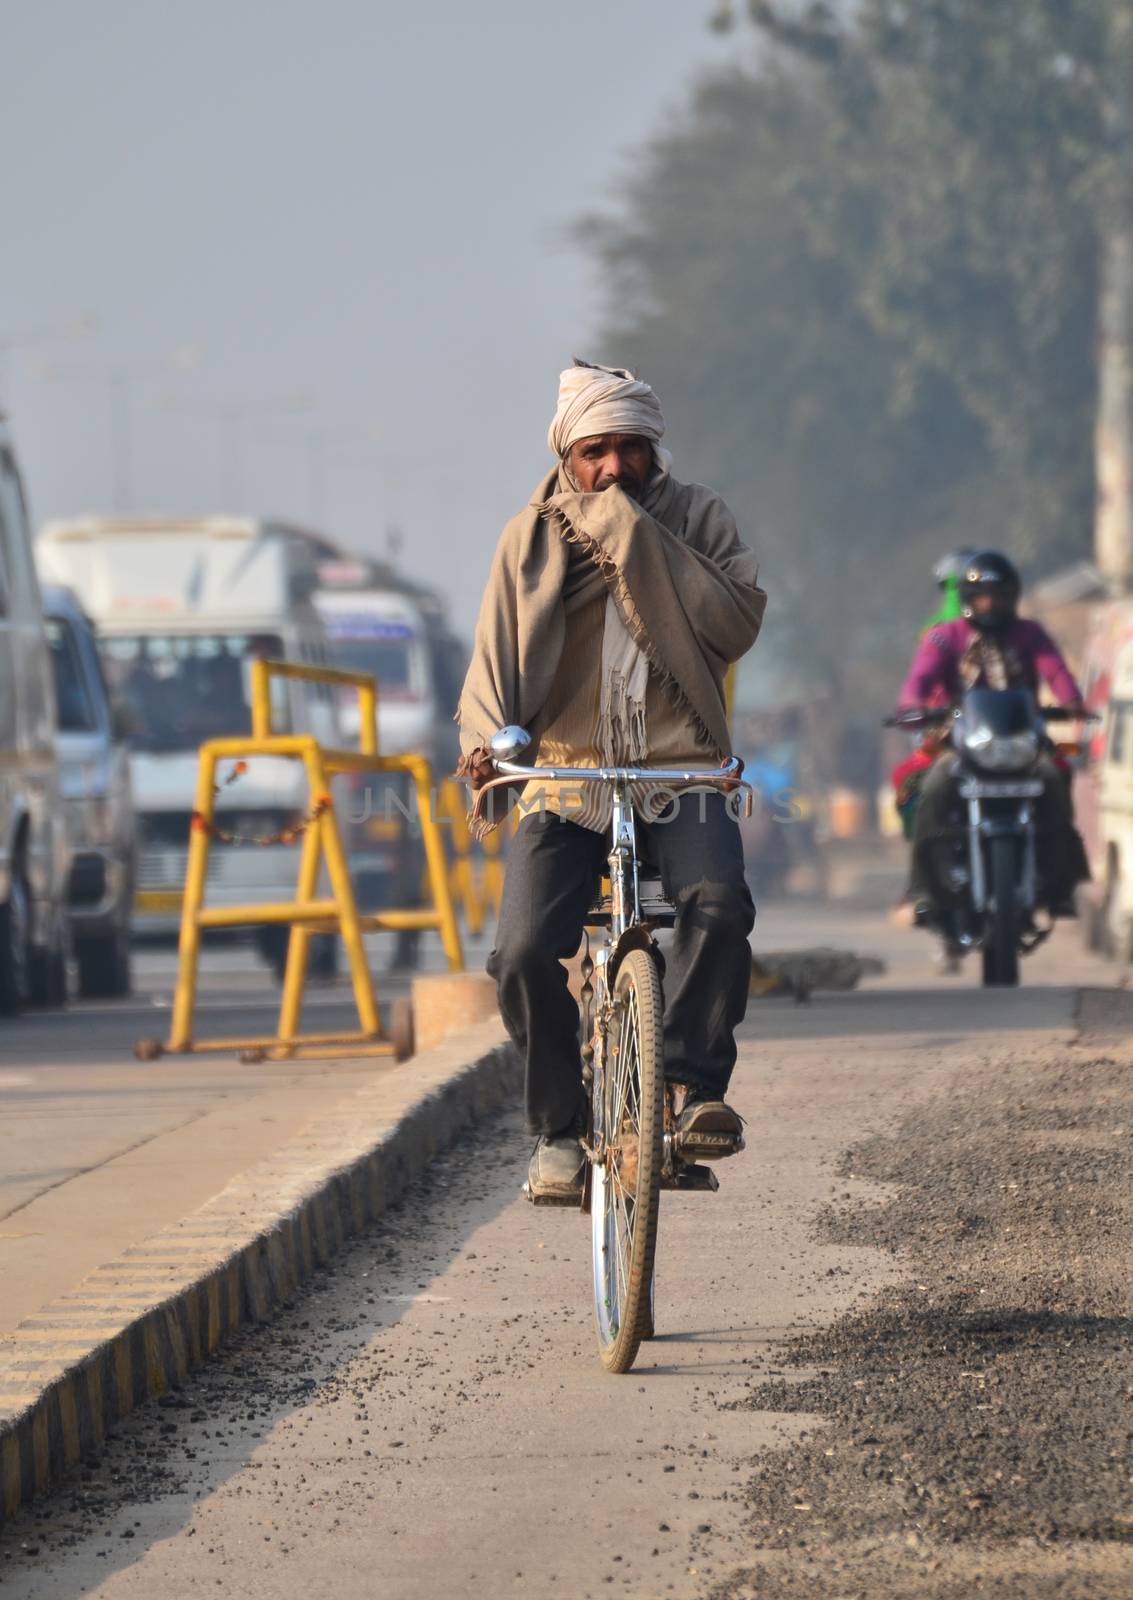 Jaipur, India - December 30, 2014: Indian people riding a bicycle in Jaipur, Rajasthan, India on December 29, 2014 . Jaipur is the capital and largest city of the Indian state of Rajasthan in Northern India